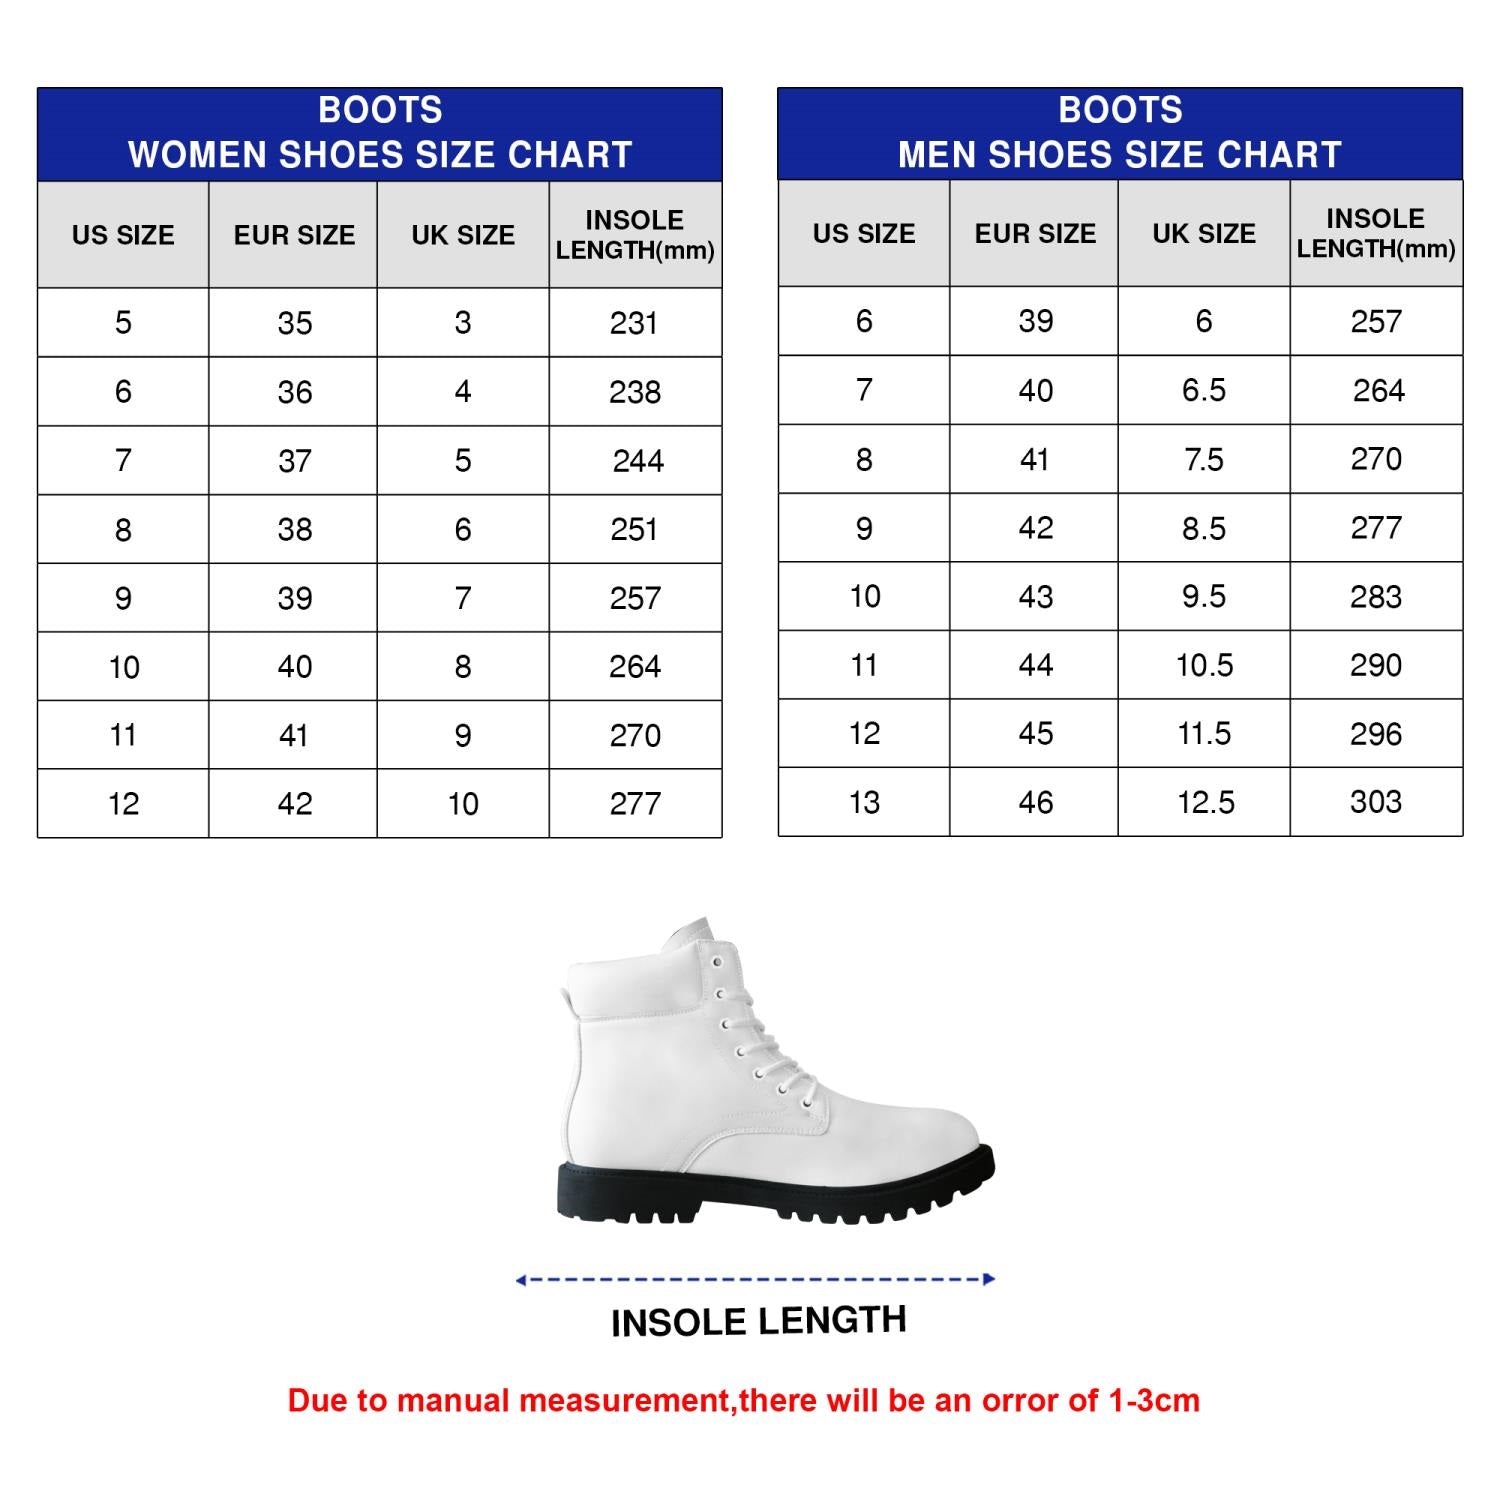 Jesus Walk By Faith Tbl Boots Blue - Christian Shoes For Men And Women